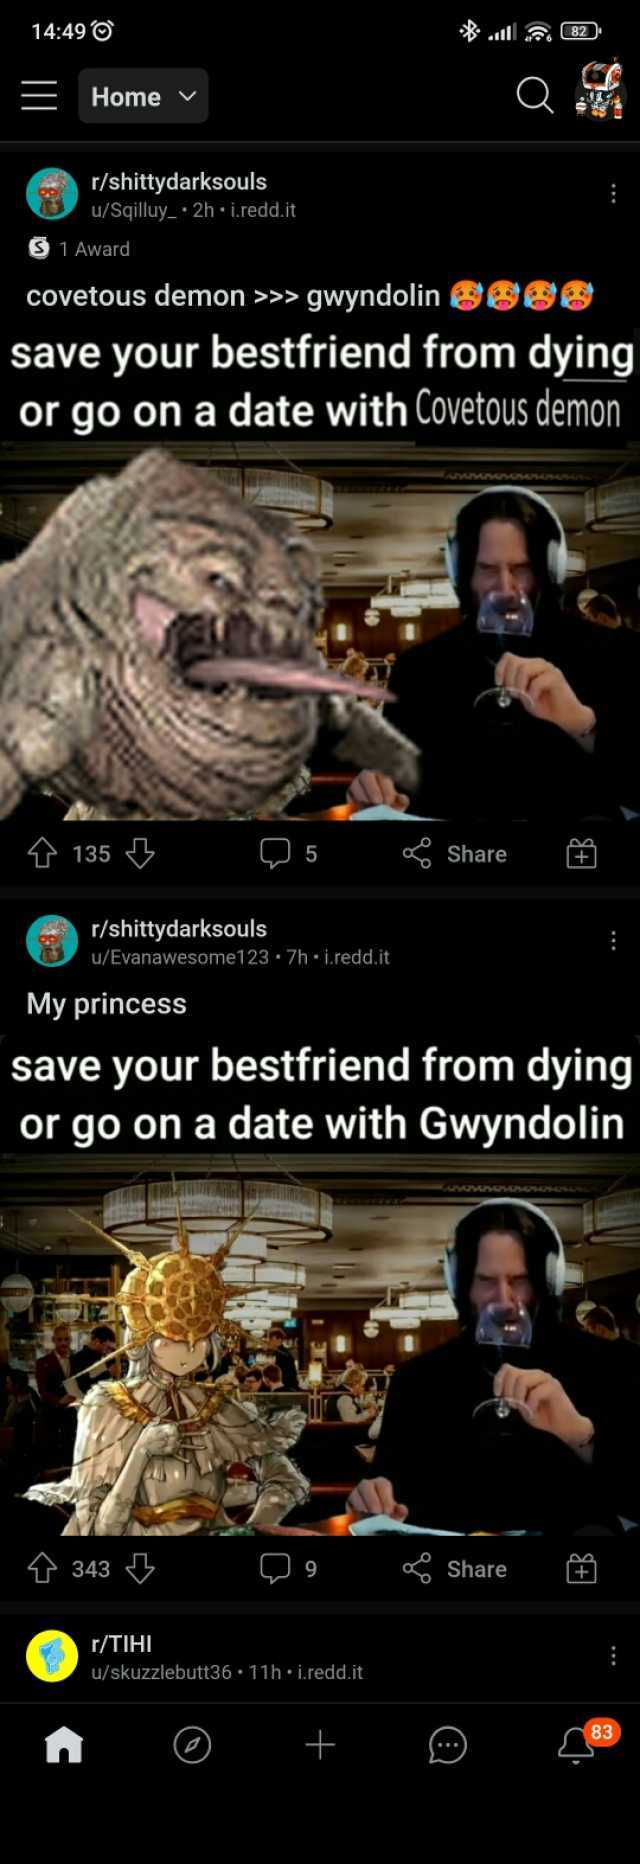 1449 Home r/shittydarksouls u/Sqilluy 2h i.redd.it S1 Award covetous demon  gwyndolin888 save your bestfriend from dying or go on a date with Covetous demon T 135 5 Share r/shittydarksouls u/Evanawesome1 23 7h- iredd.it My princes